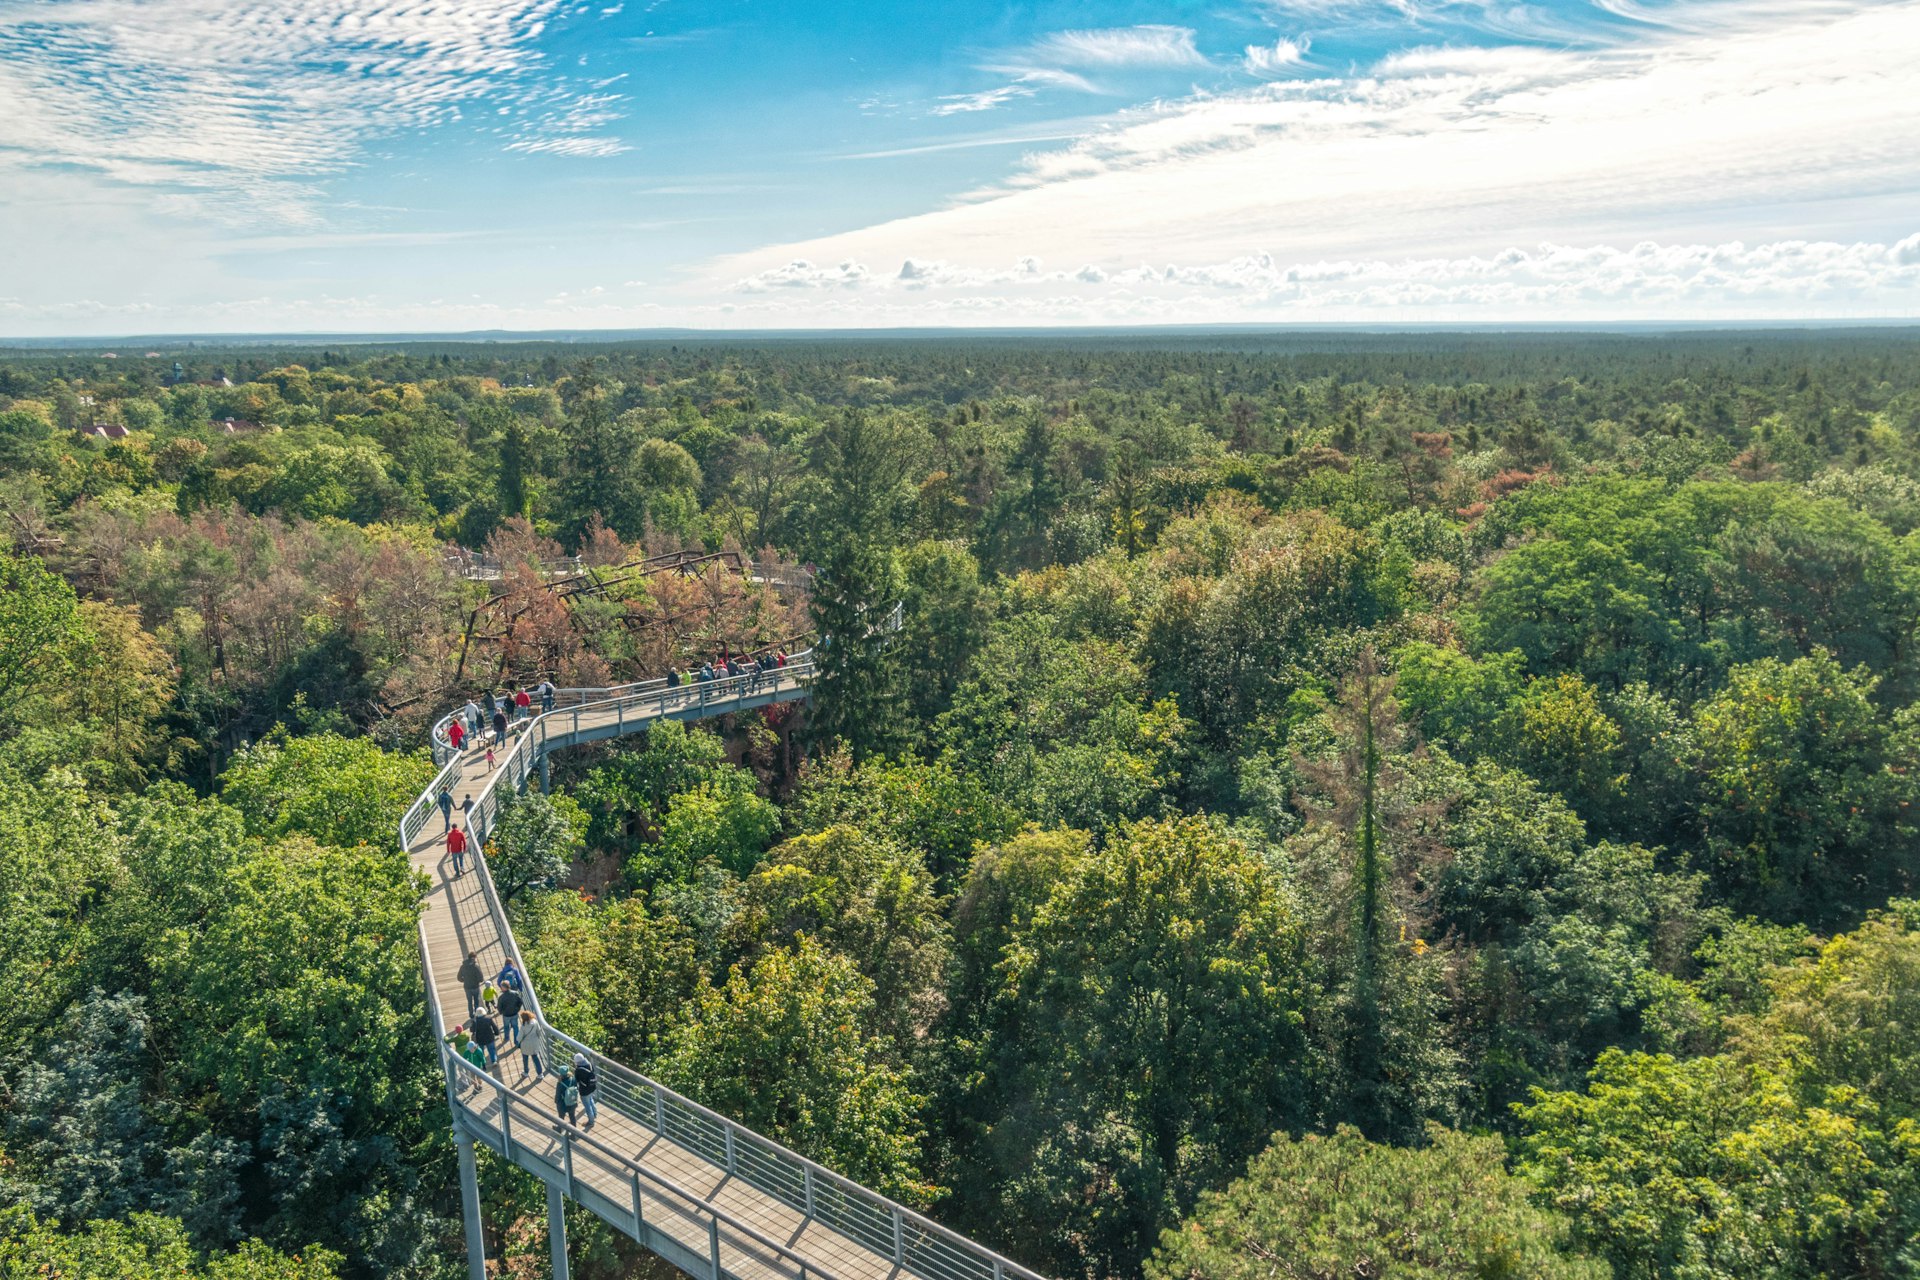 An overhead view of people on a metal walkway through forest canopy in autumn in Beelitz, Germany